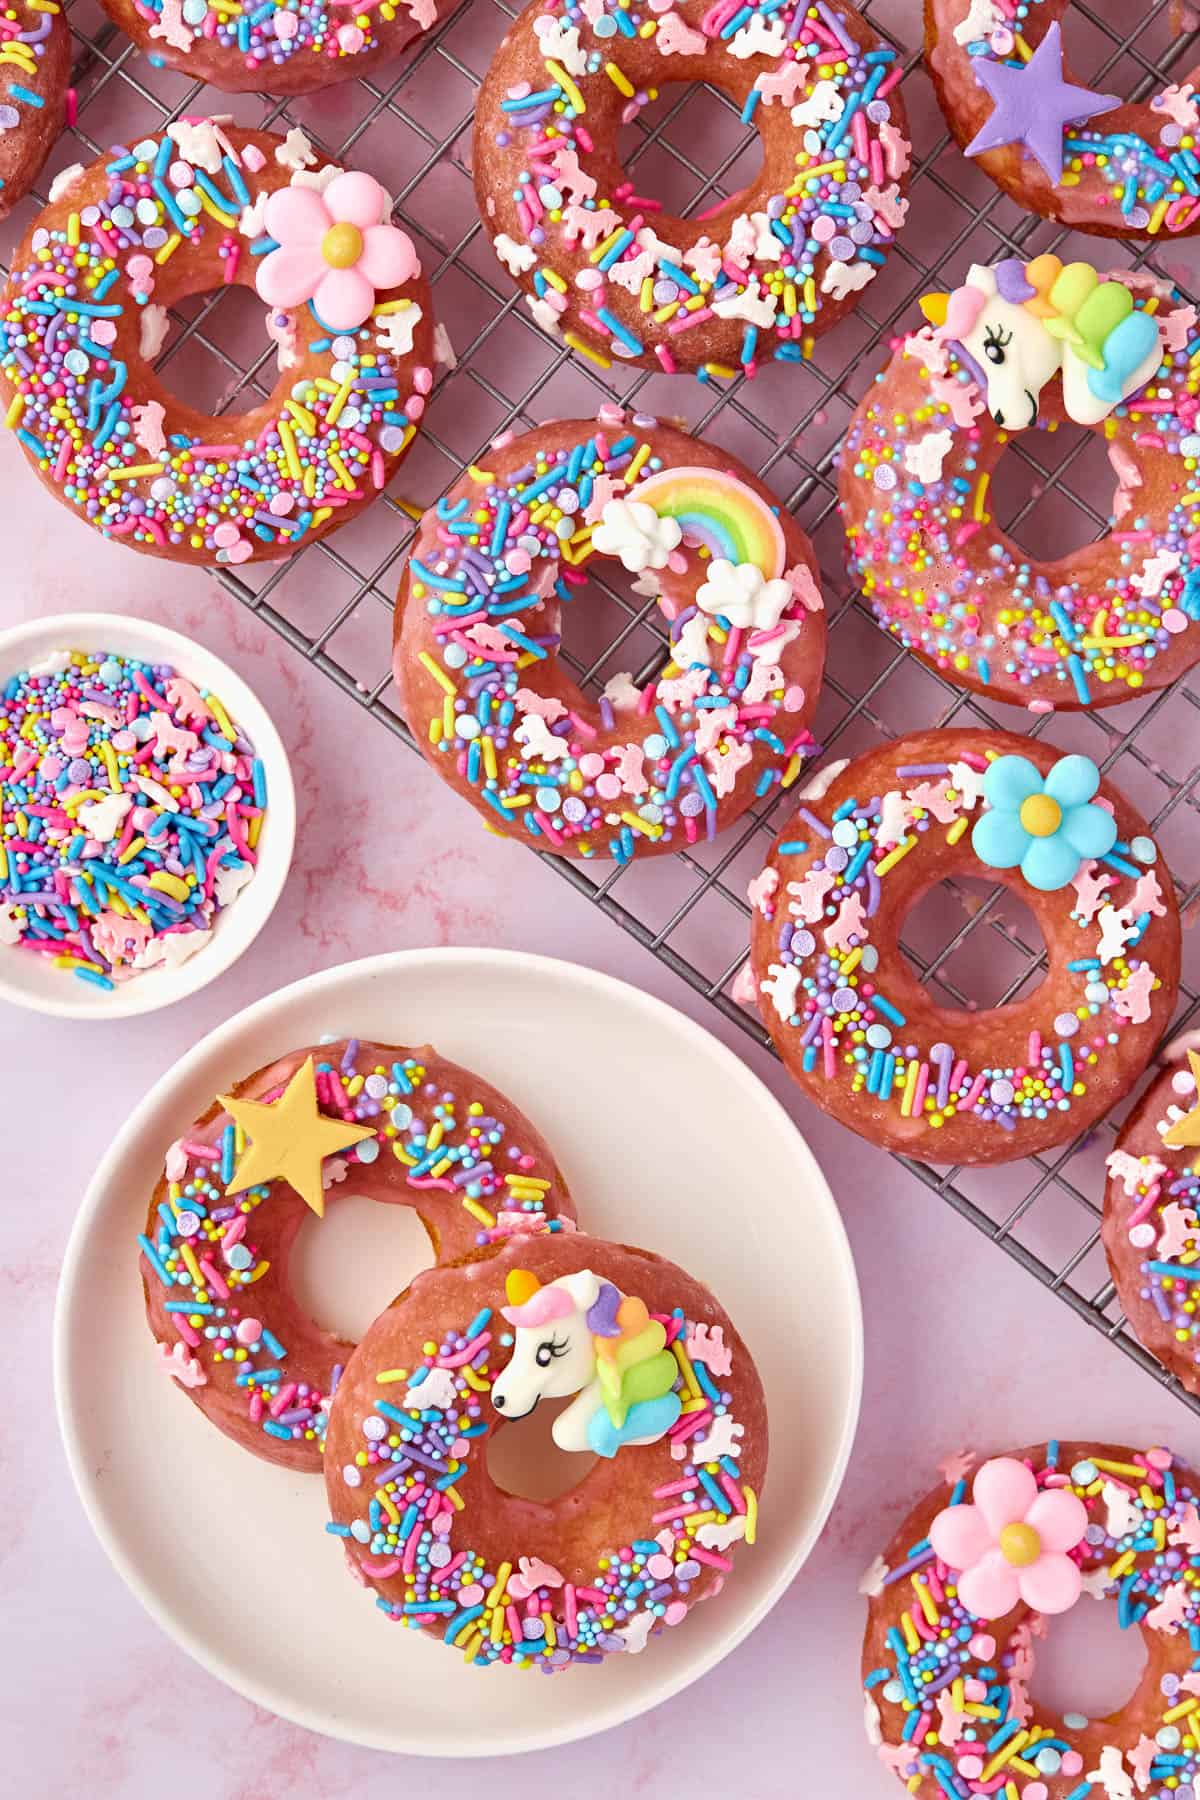 these cake donuts are a great idea for a unicorn party